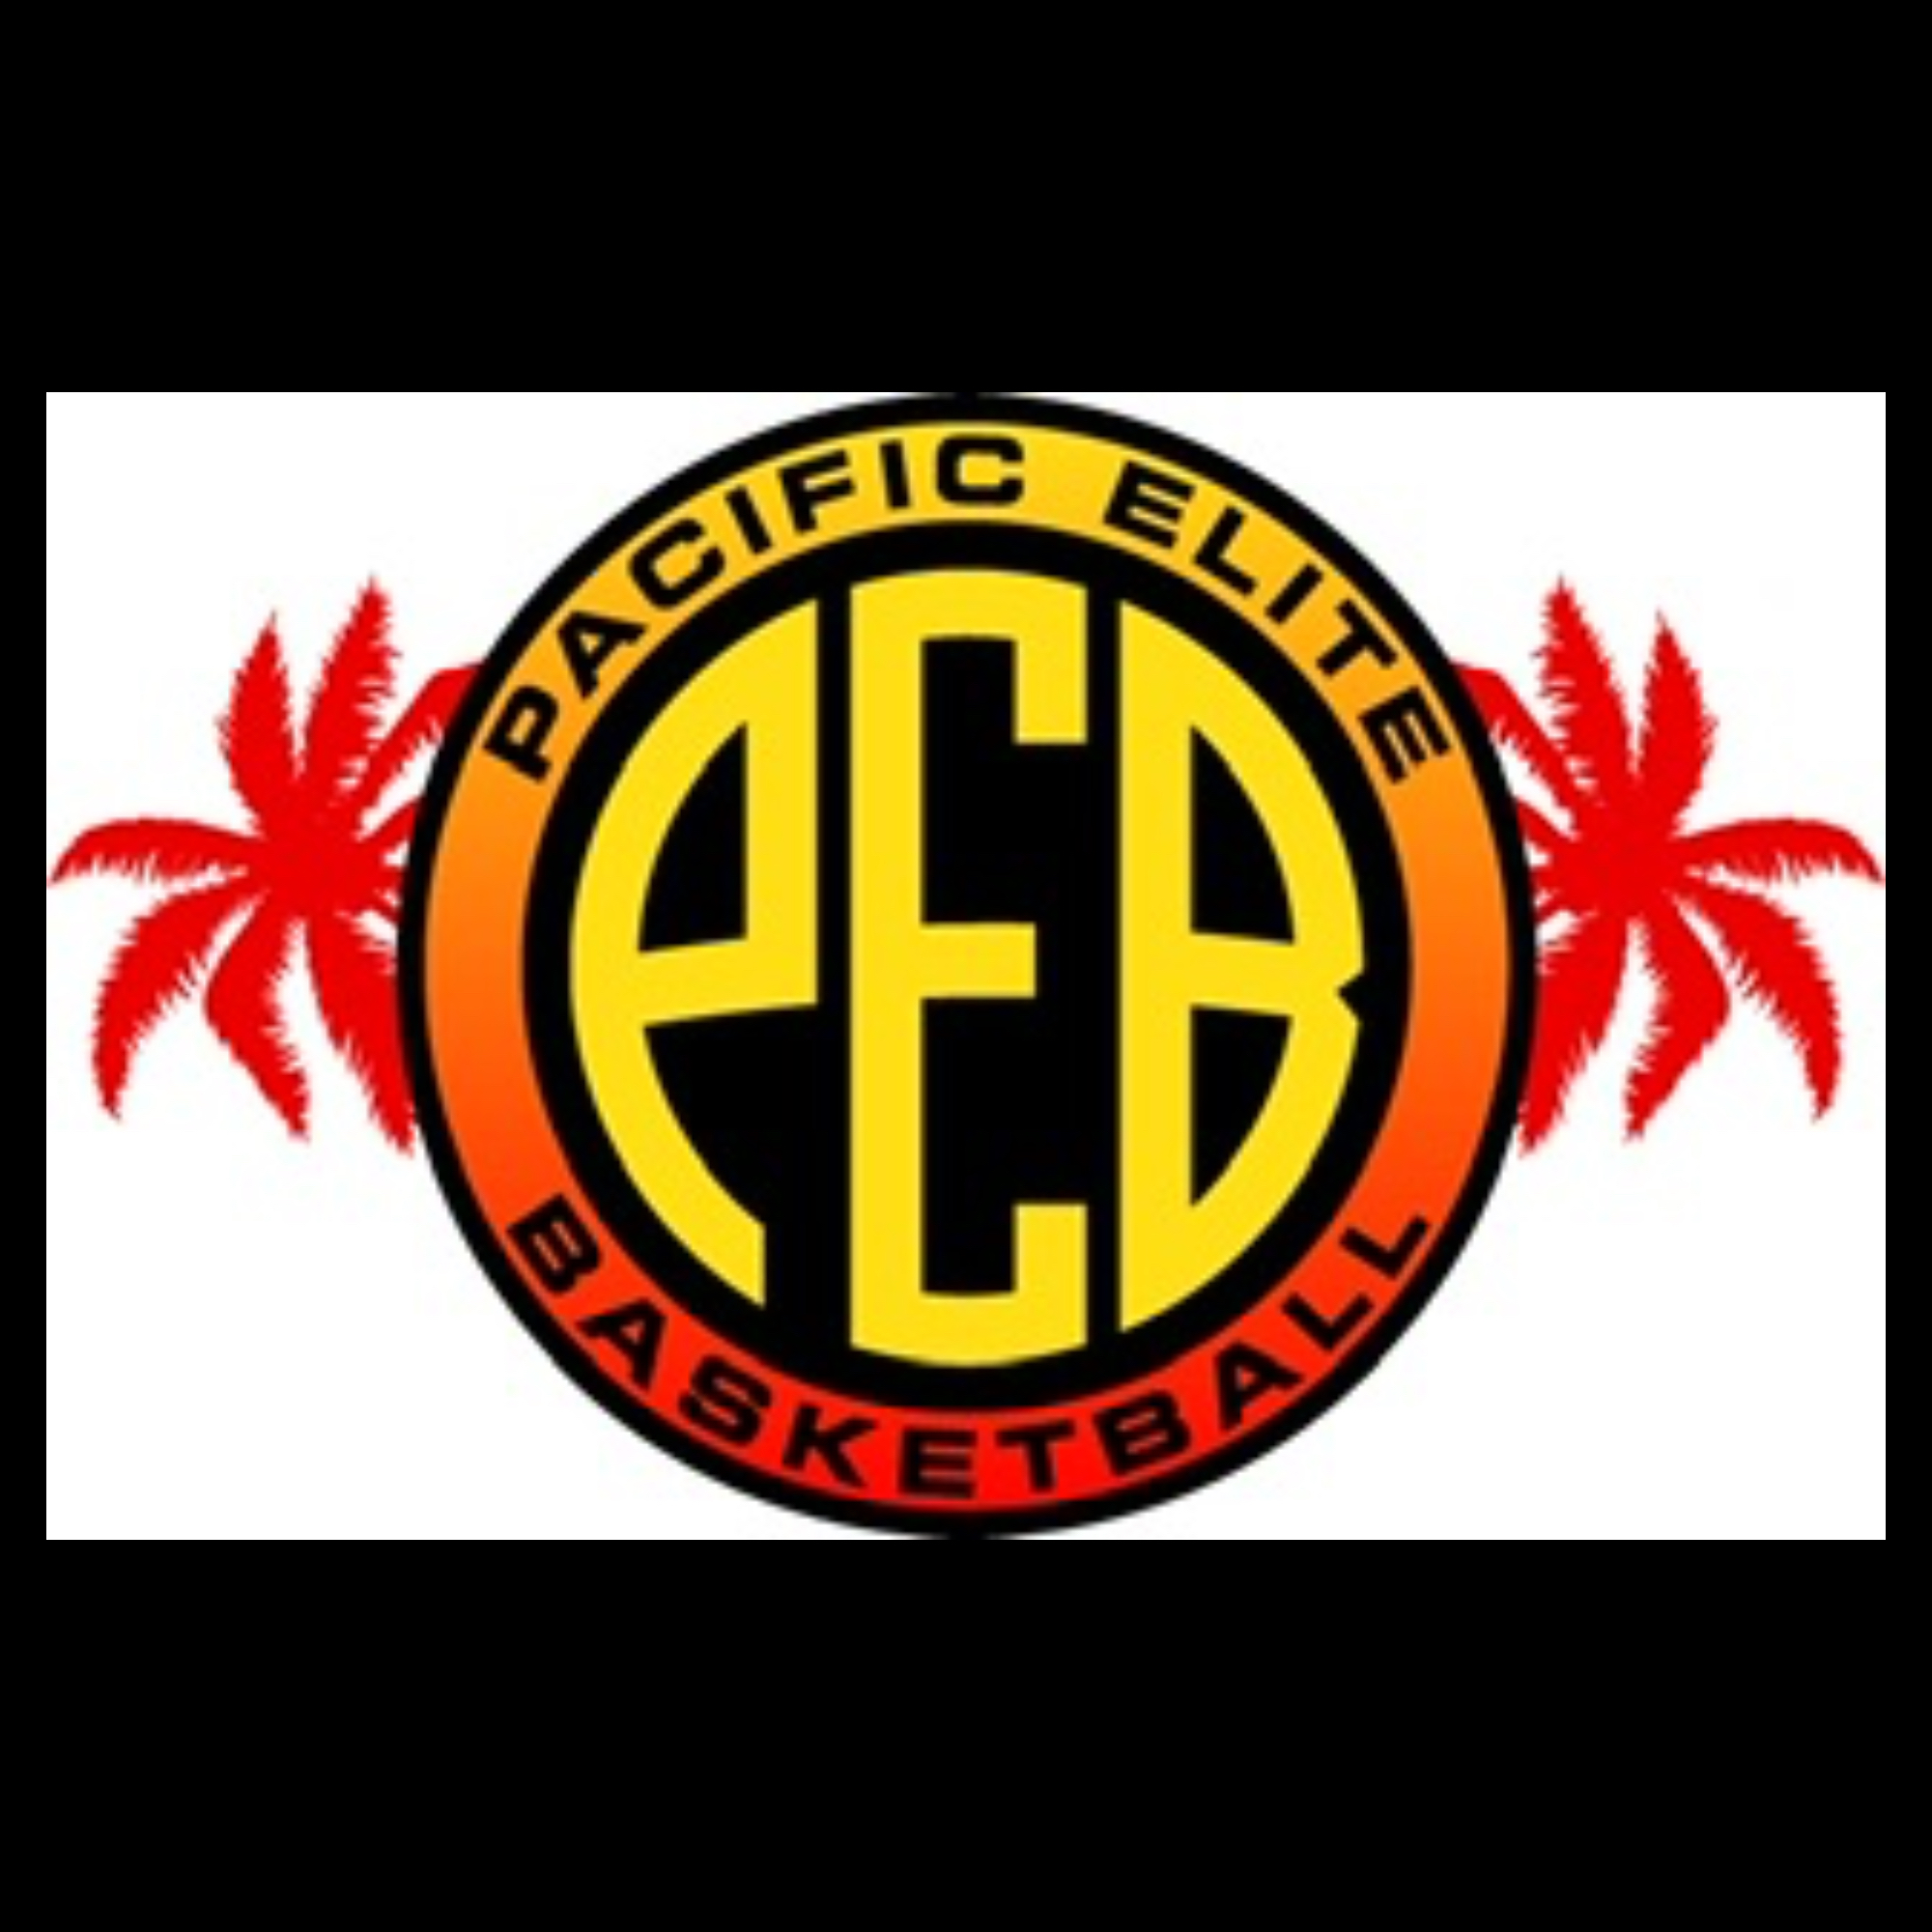 The official logo of PACIFIC ELITE BASKETBALL